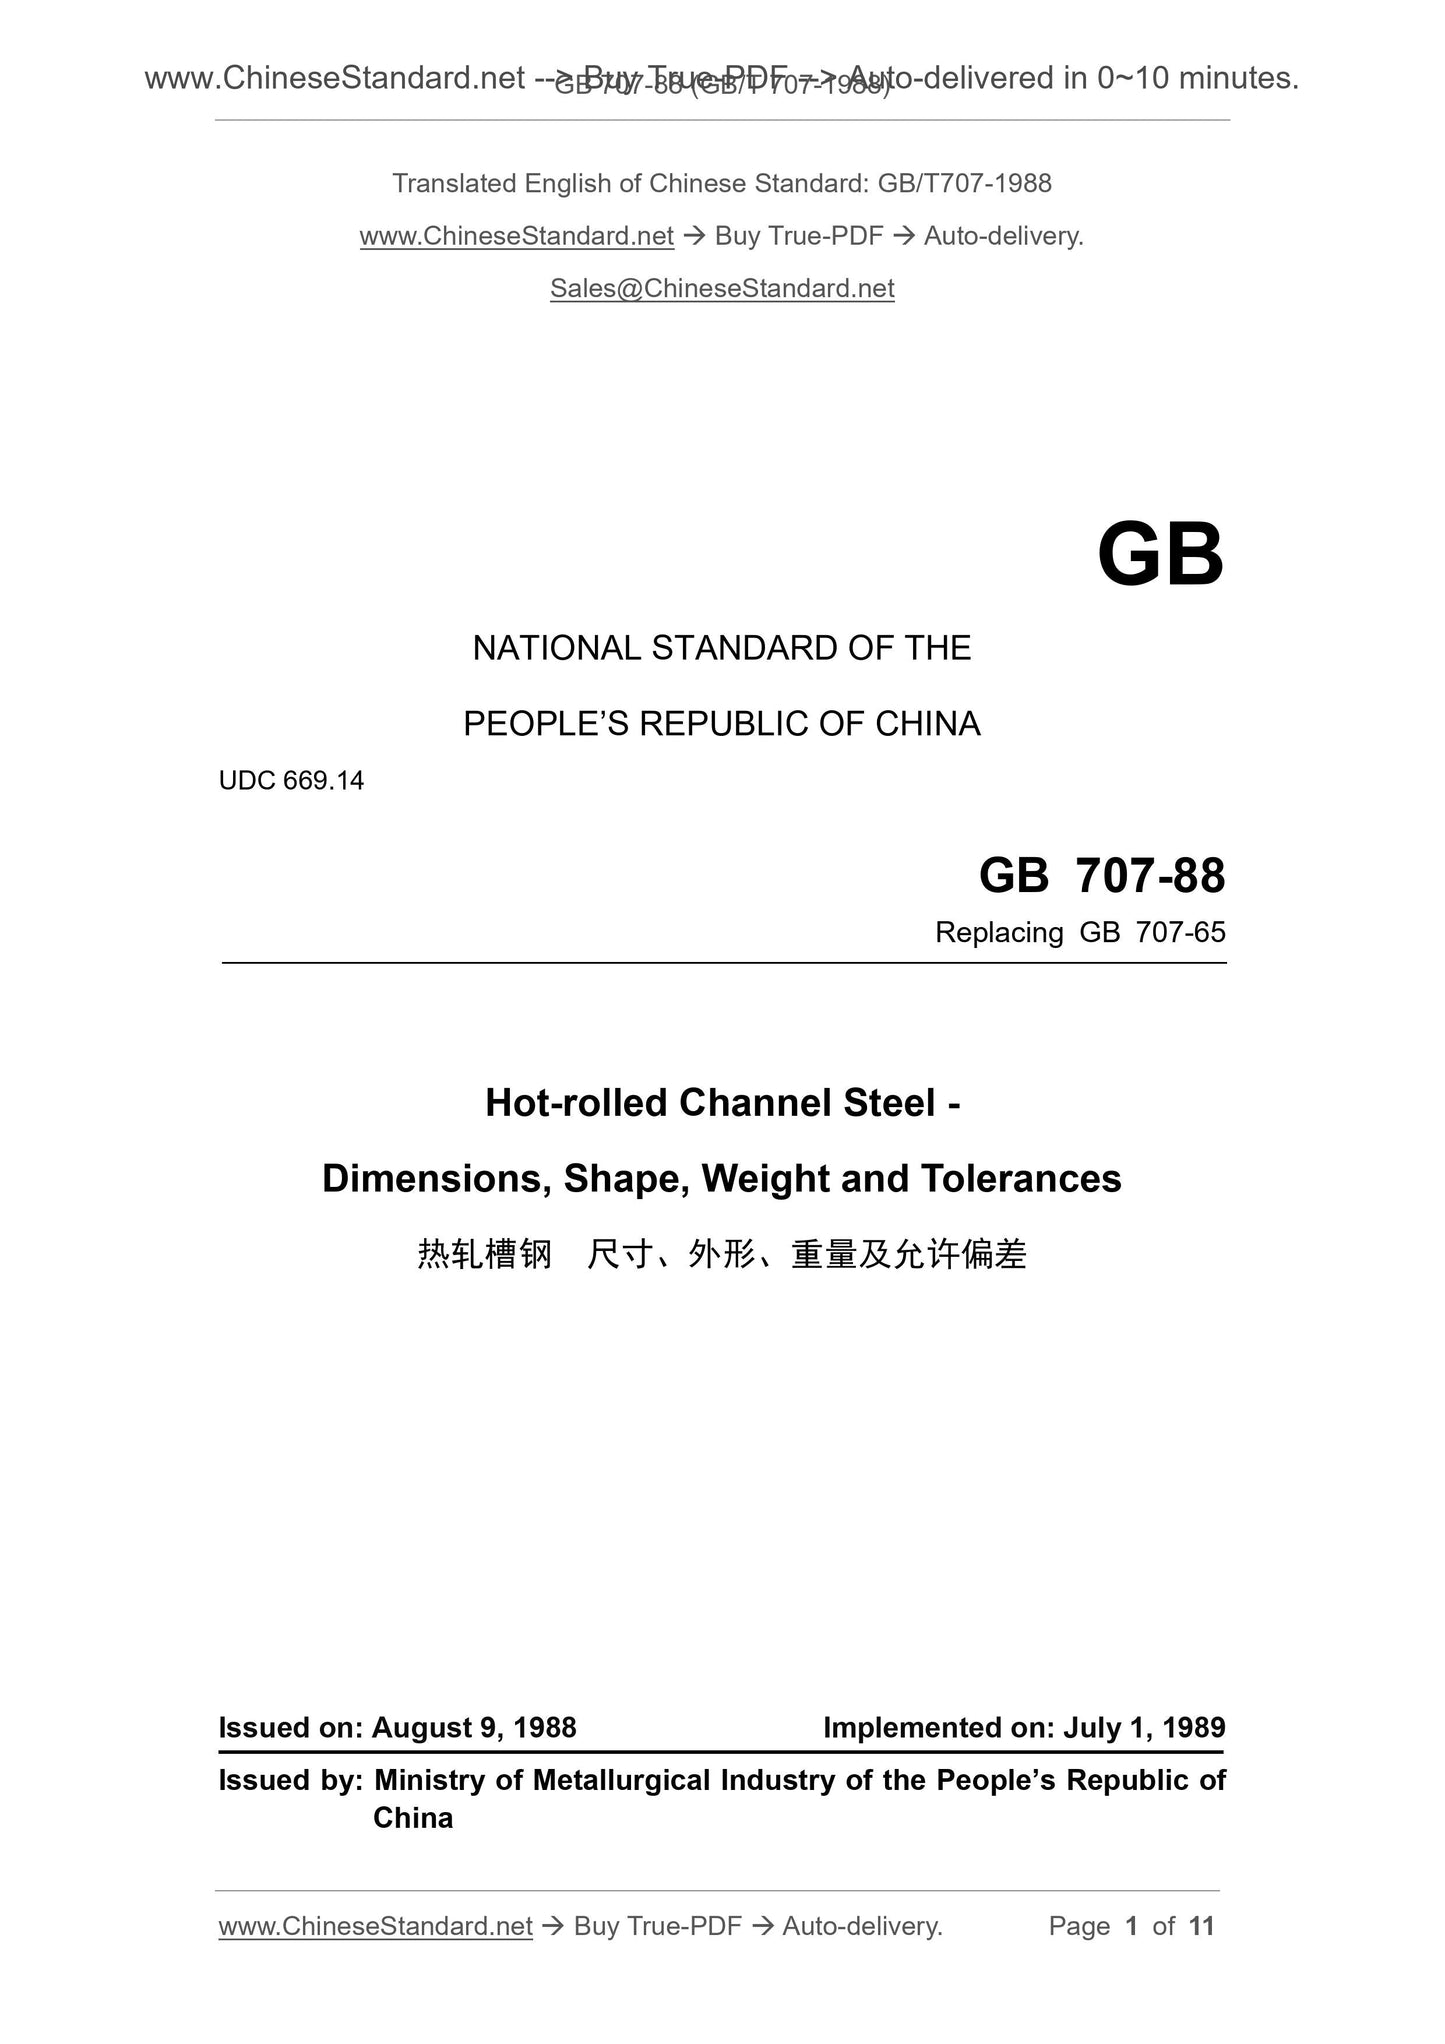 GB/T 707-1988 Page 1